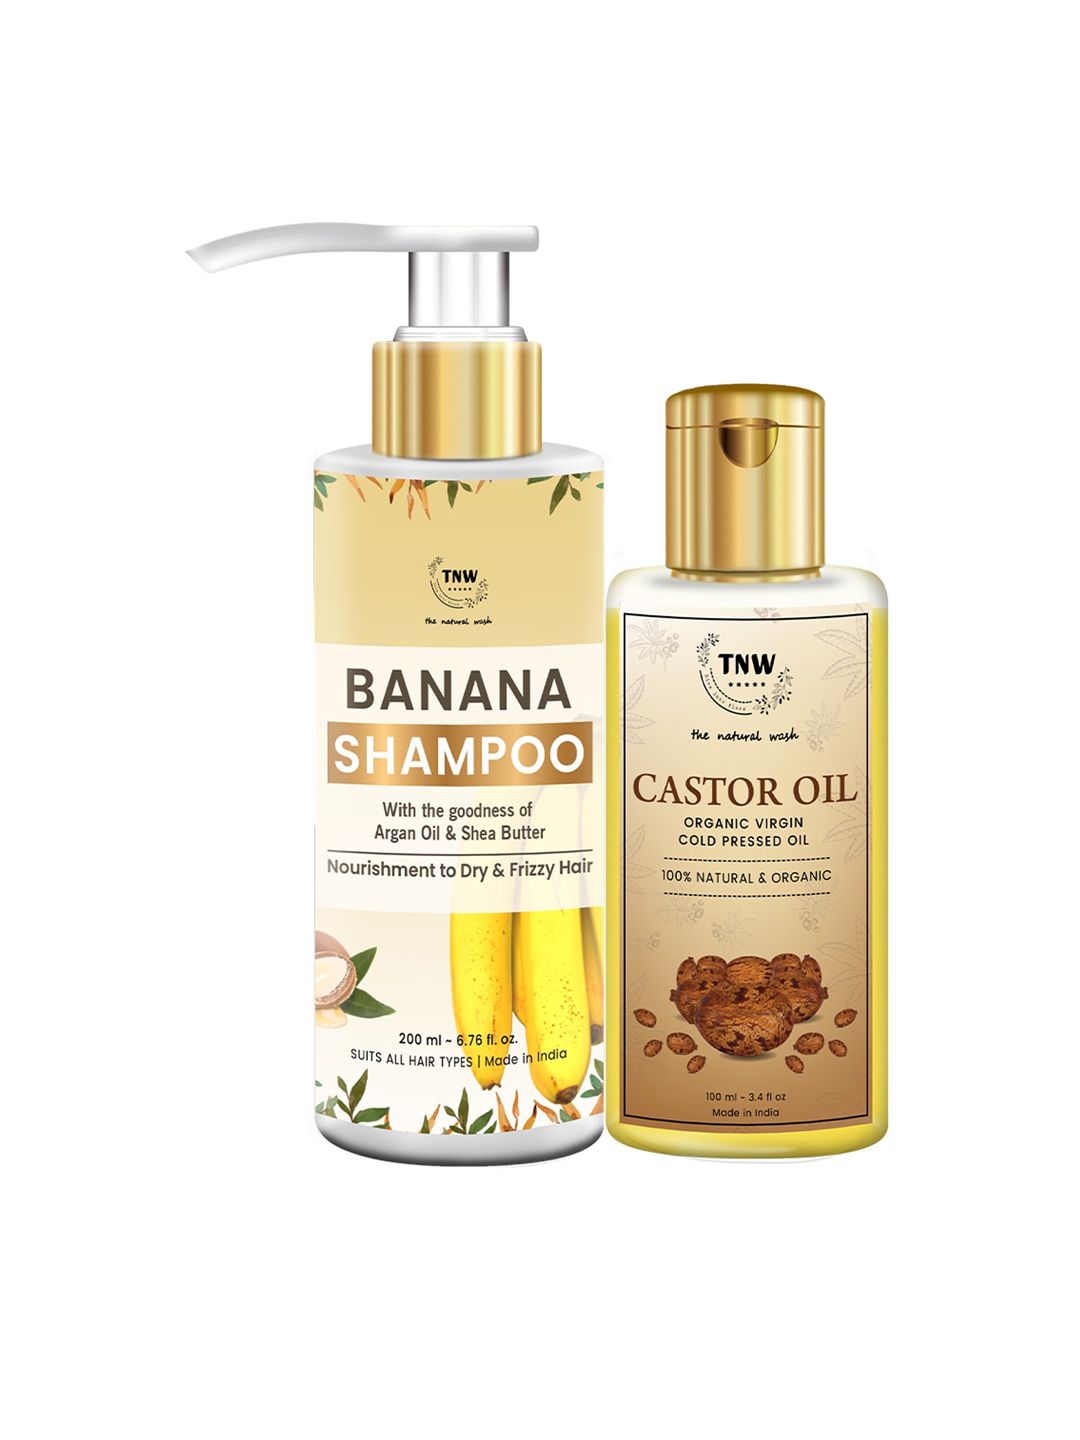 TNW the natural wash Set of 2 Castor Oil & Banana Shampoo Price in India